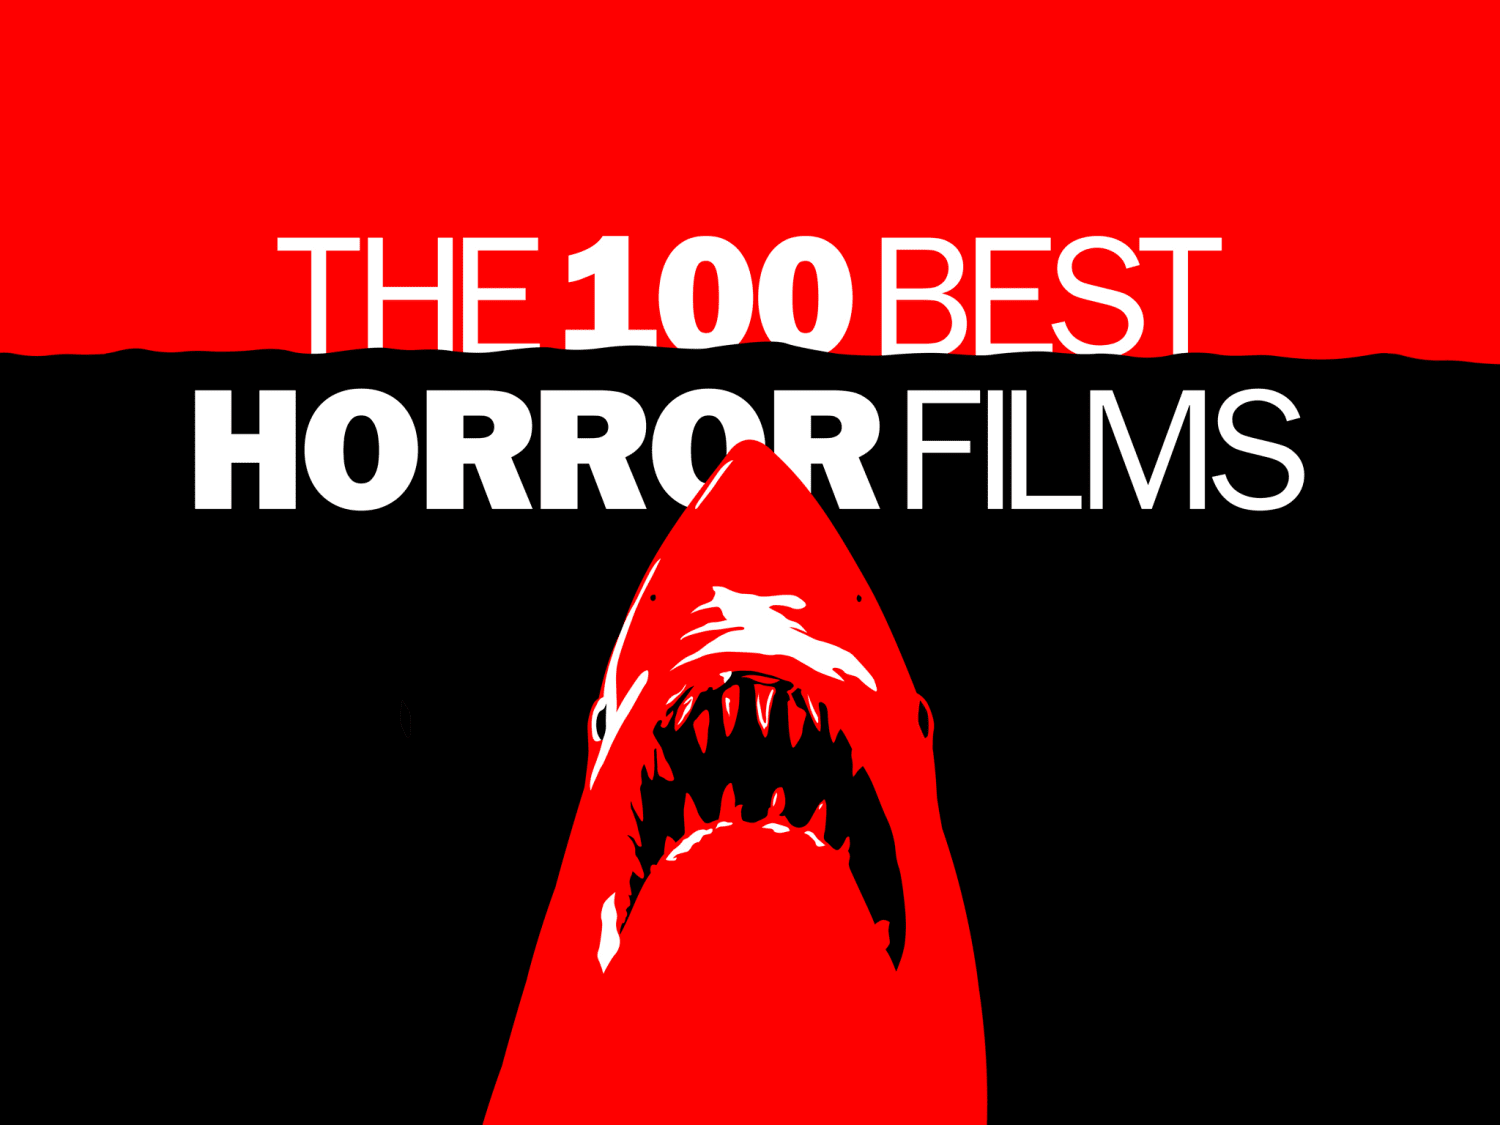 The 100 best horror films - the scariest movies ranked by experts